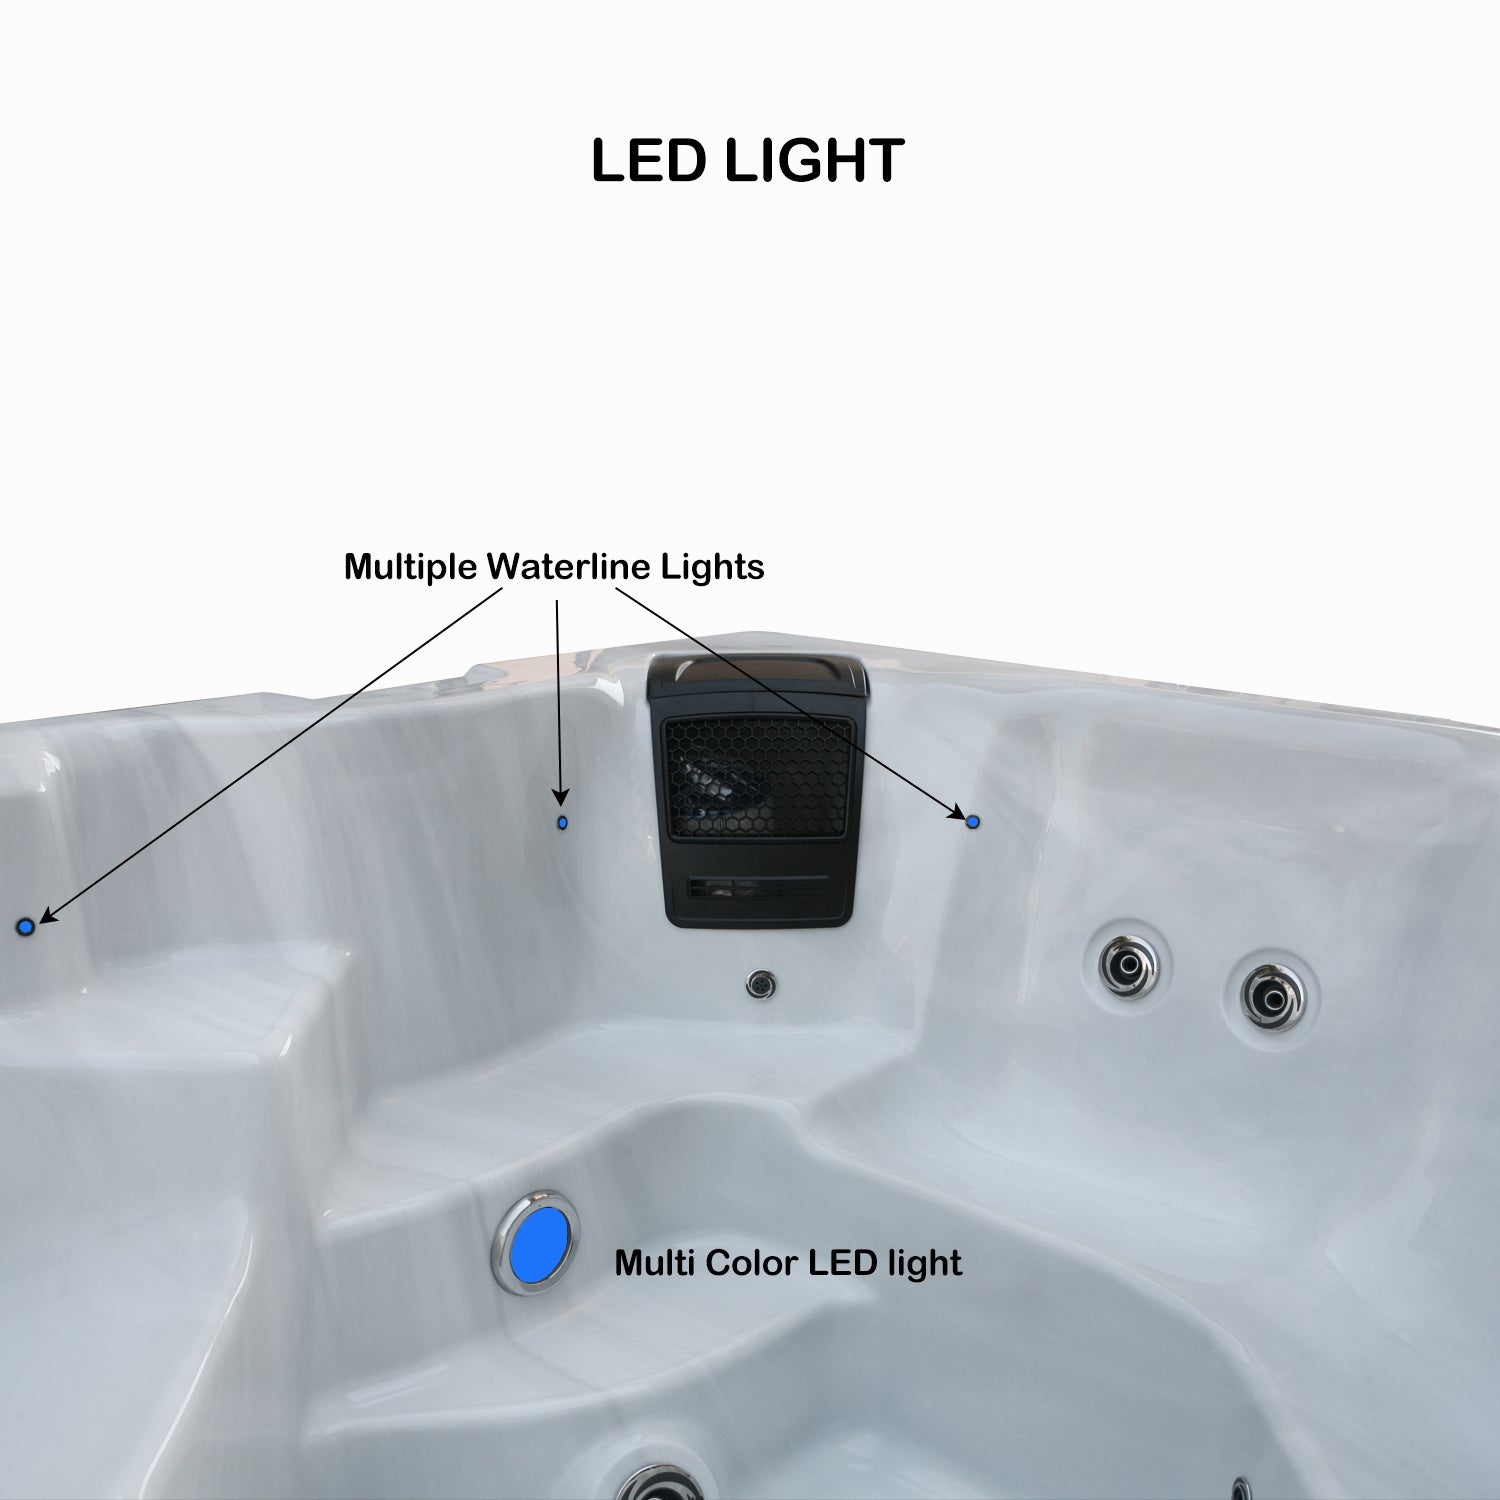 details about LED light, or underwater light in the acrylic hot tub. Multiple lights are available with multi color options